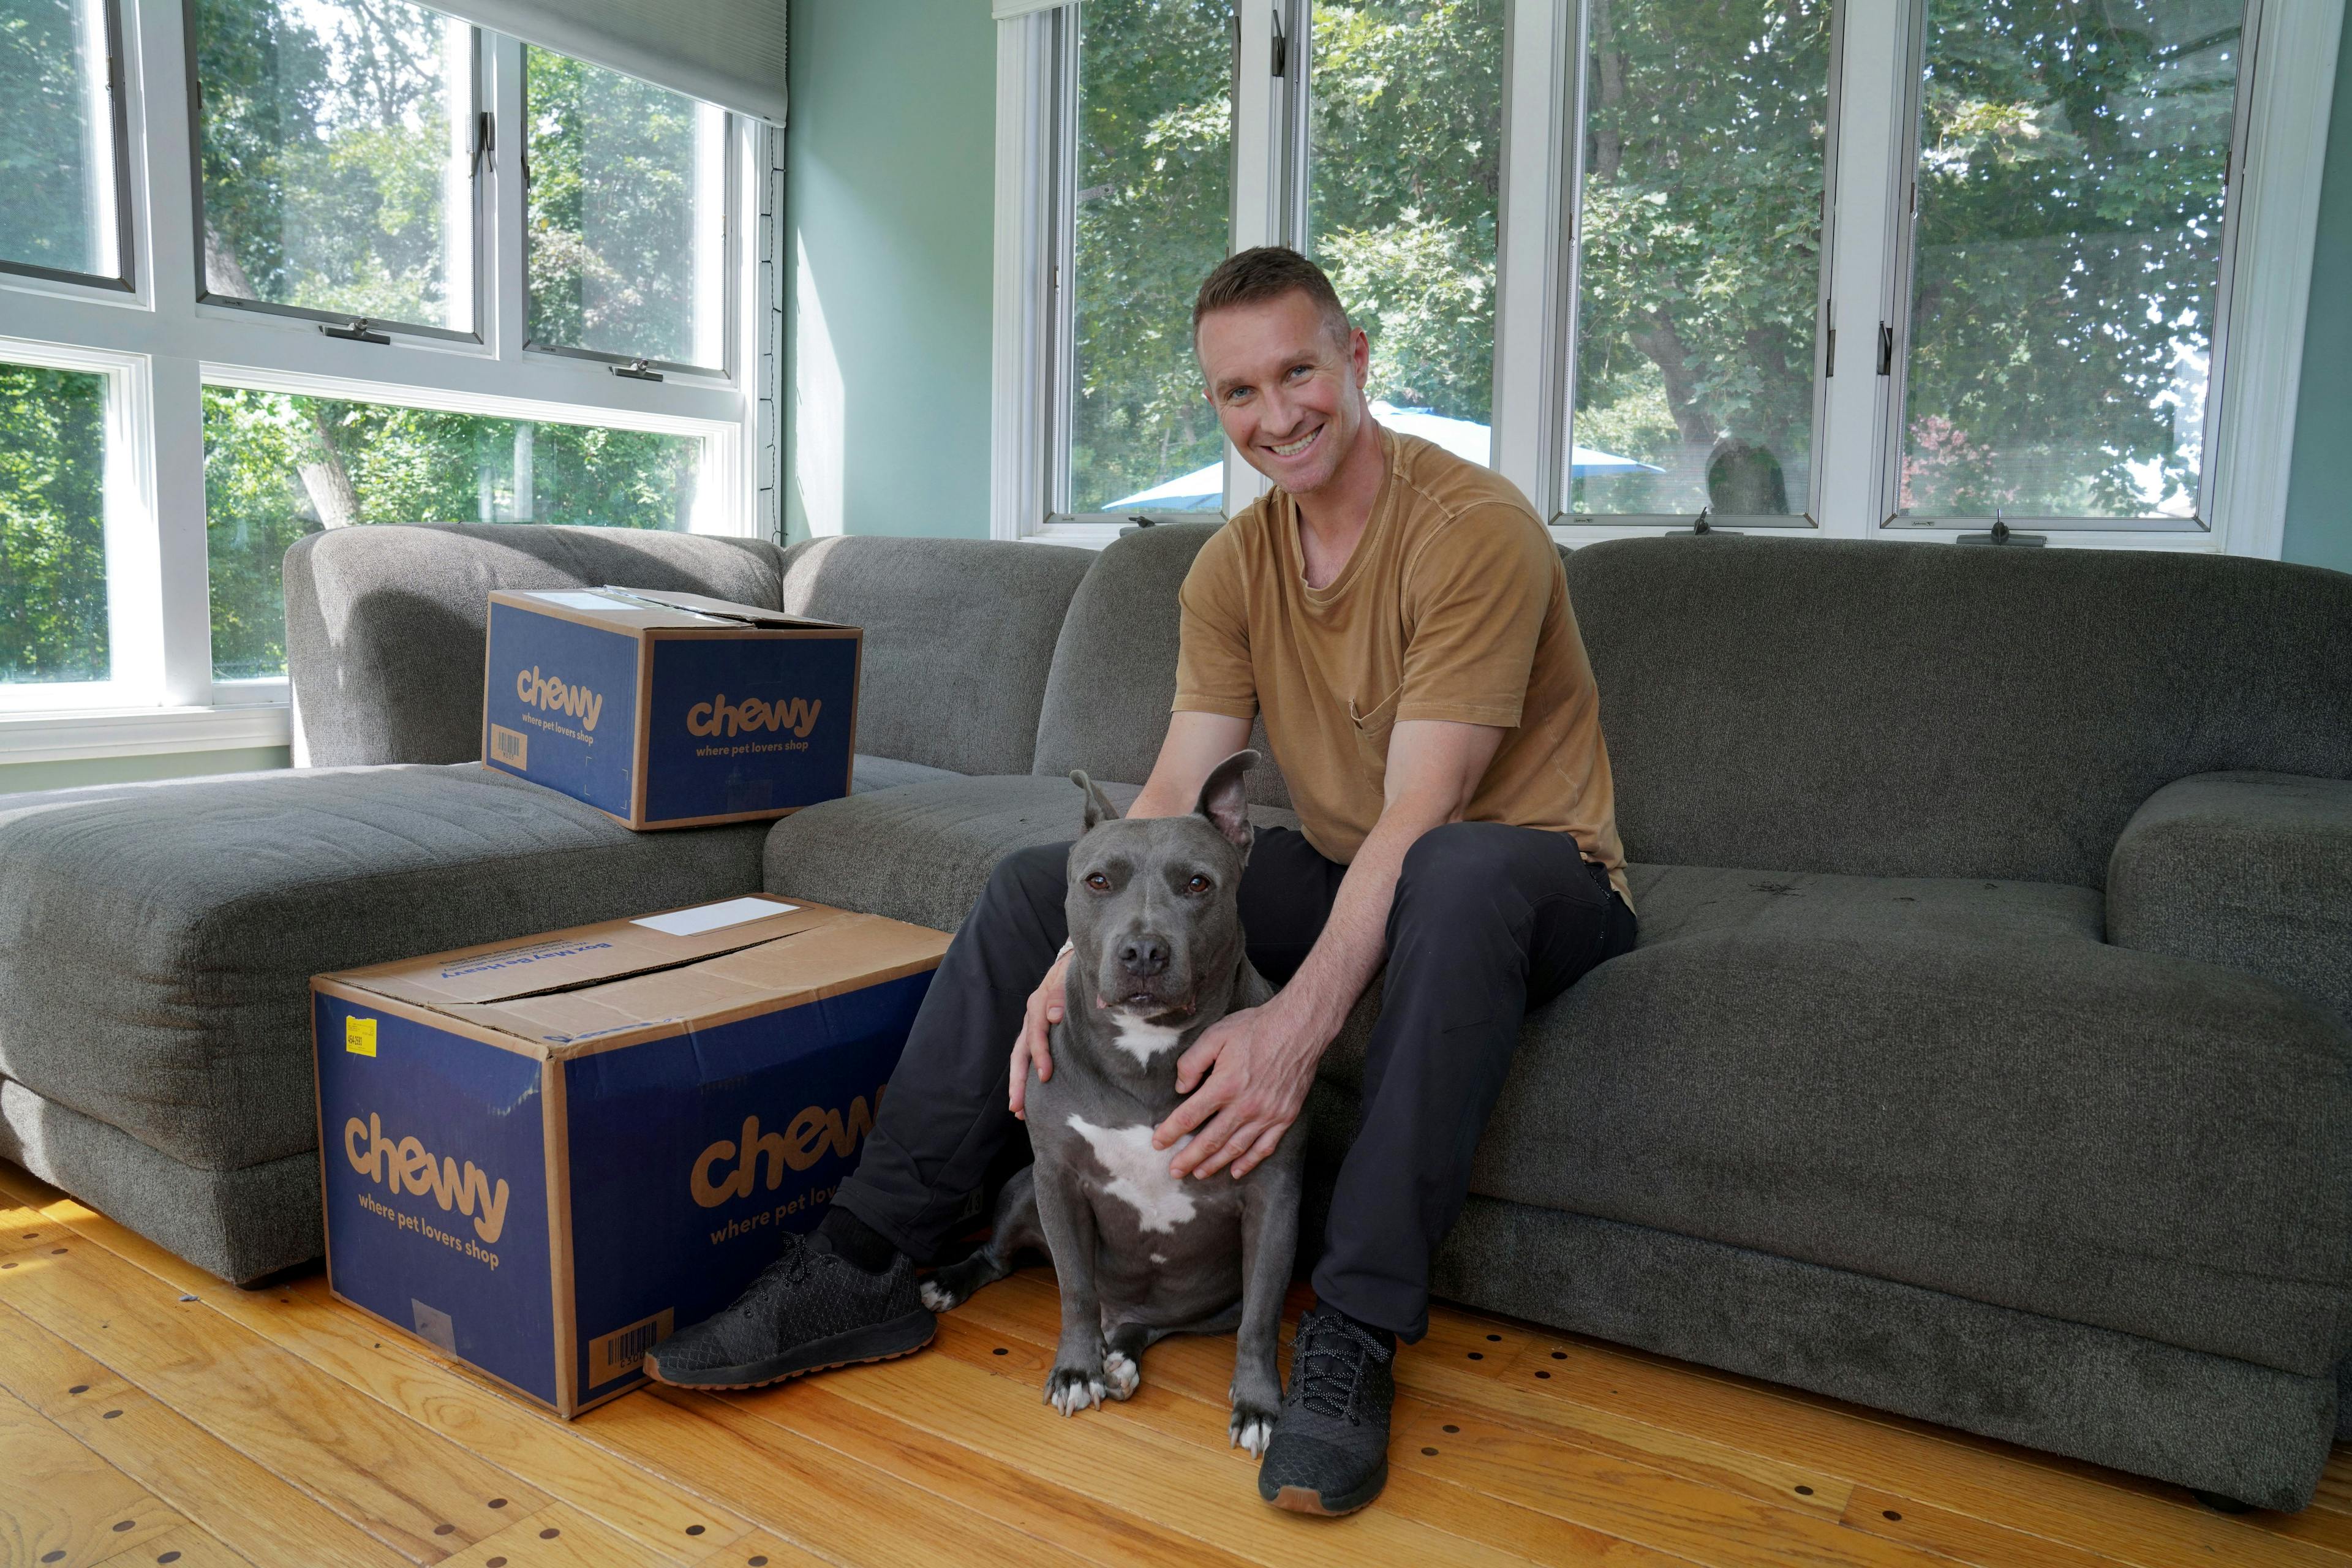 Chewy Claus holiday campaign aims to deliver cheer